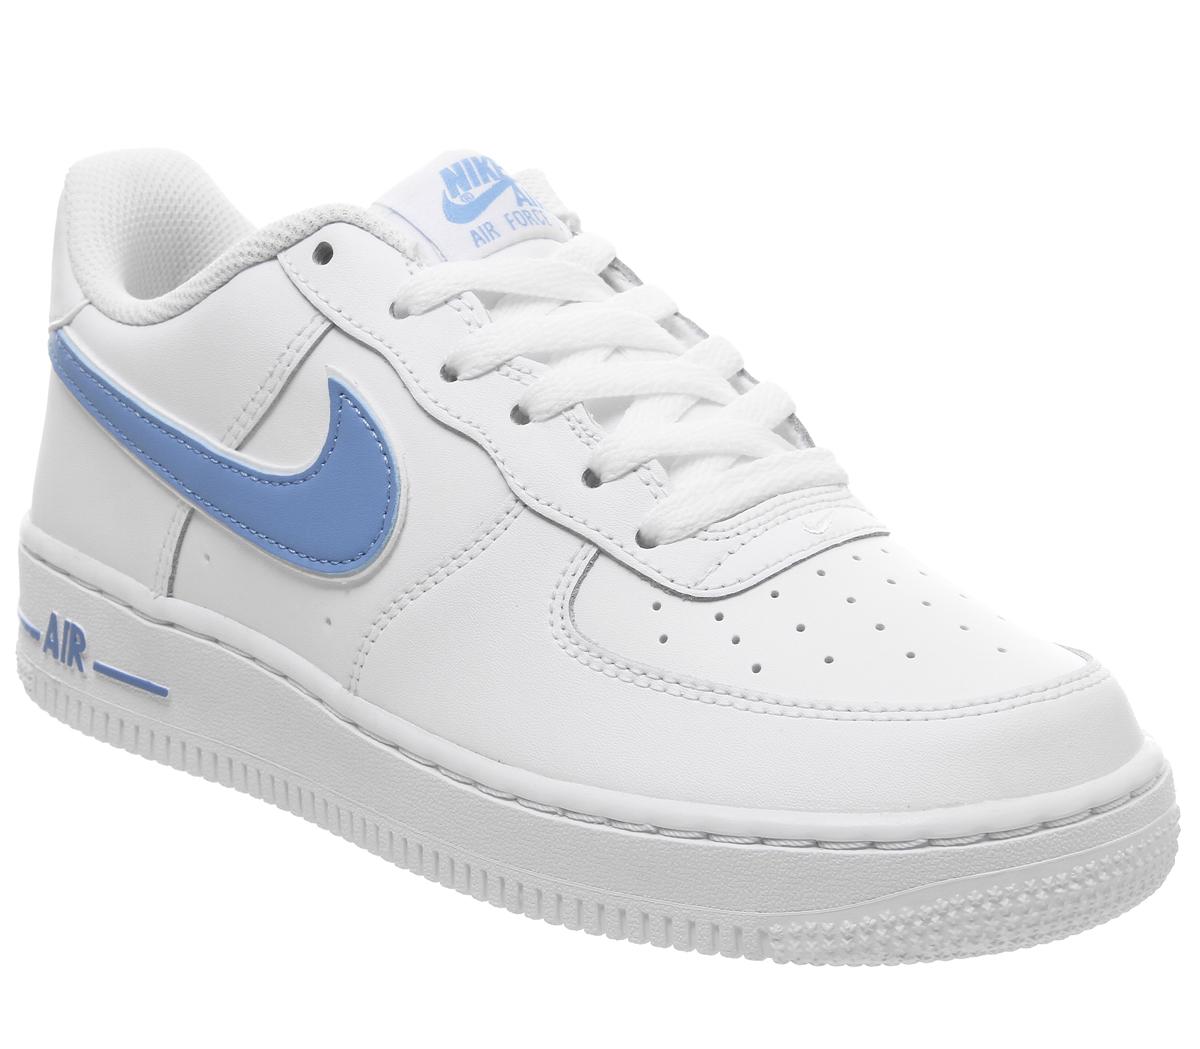 Nike Af1 Boys White Blue - Hers trainers